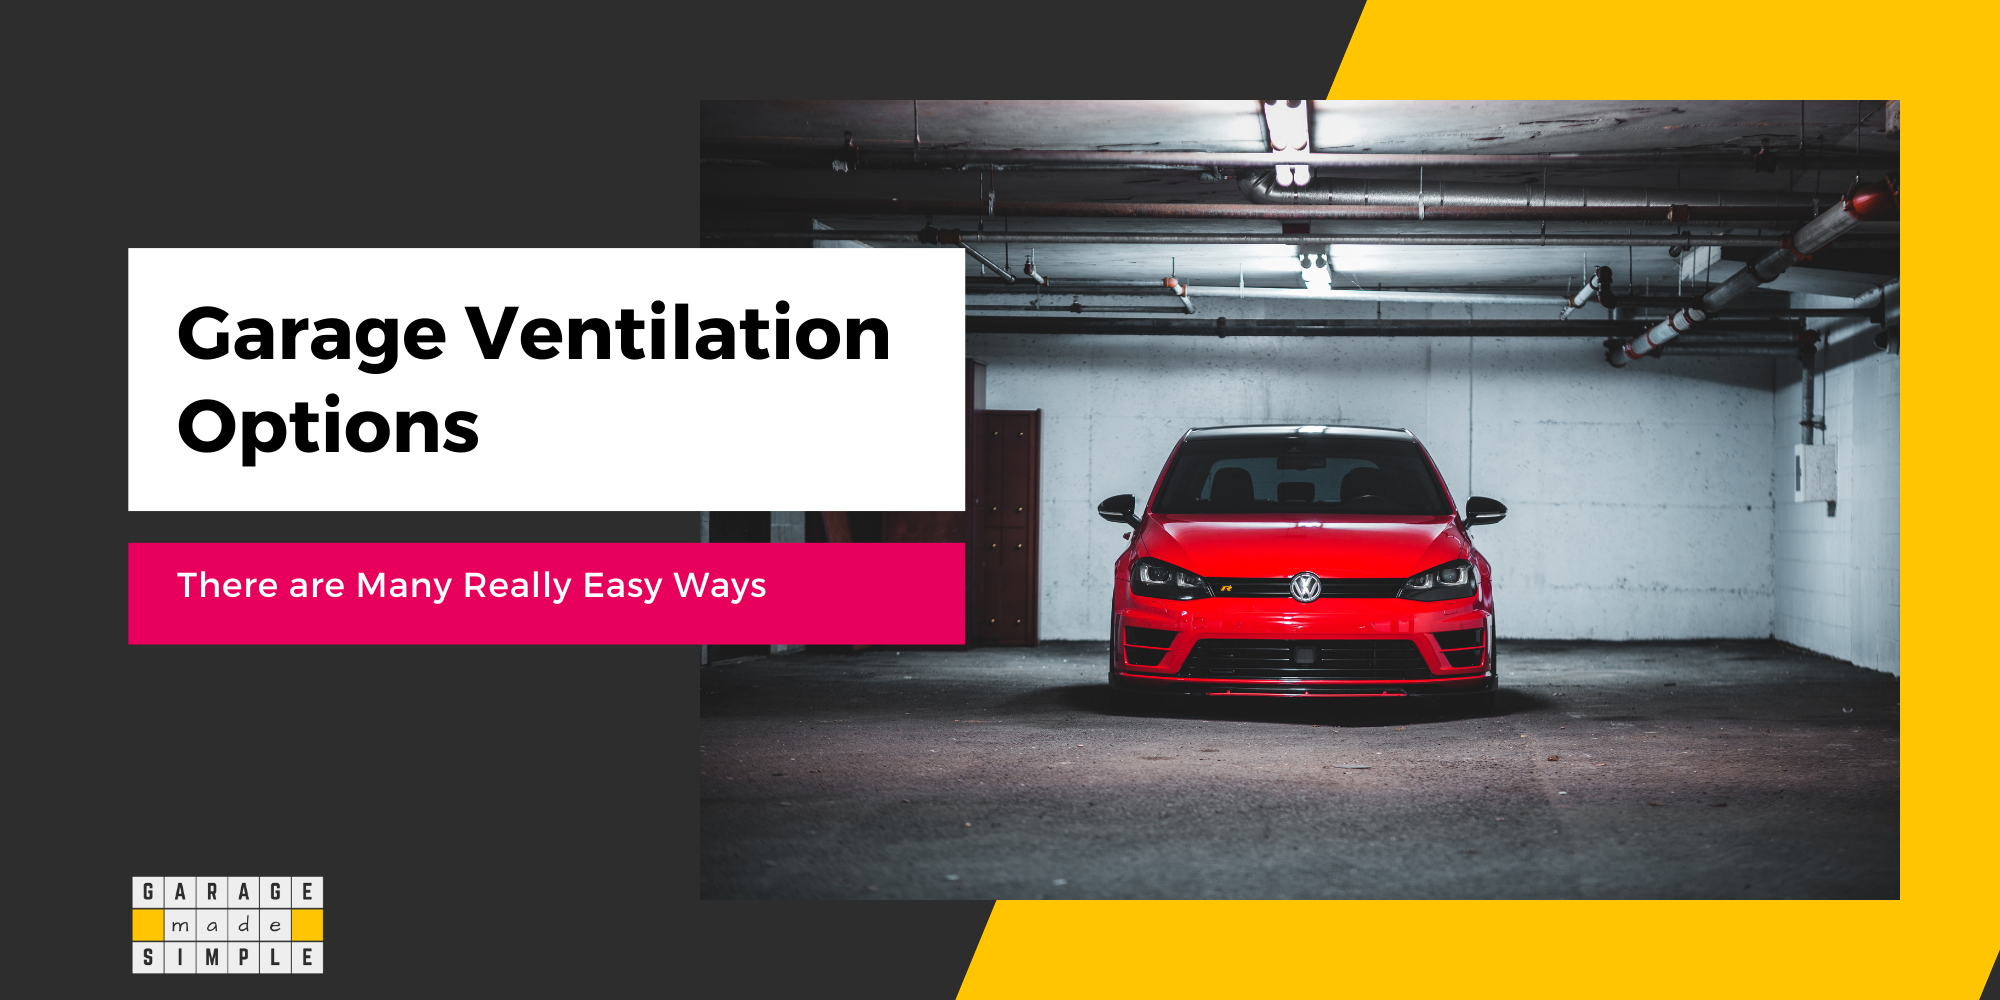 10 Top Garage Ventilation Options: What Is The Best Way?